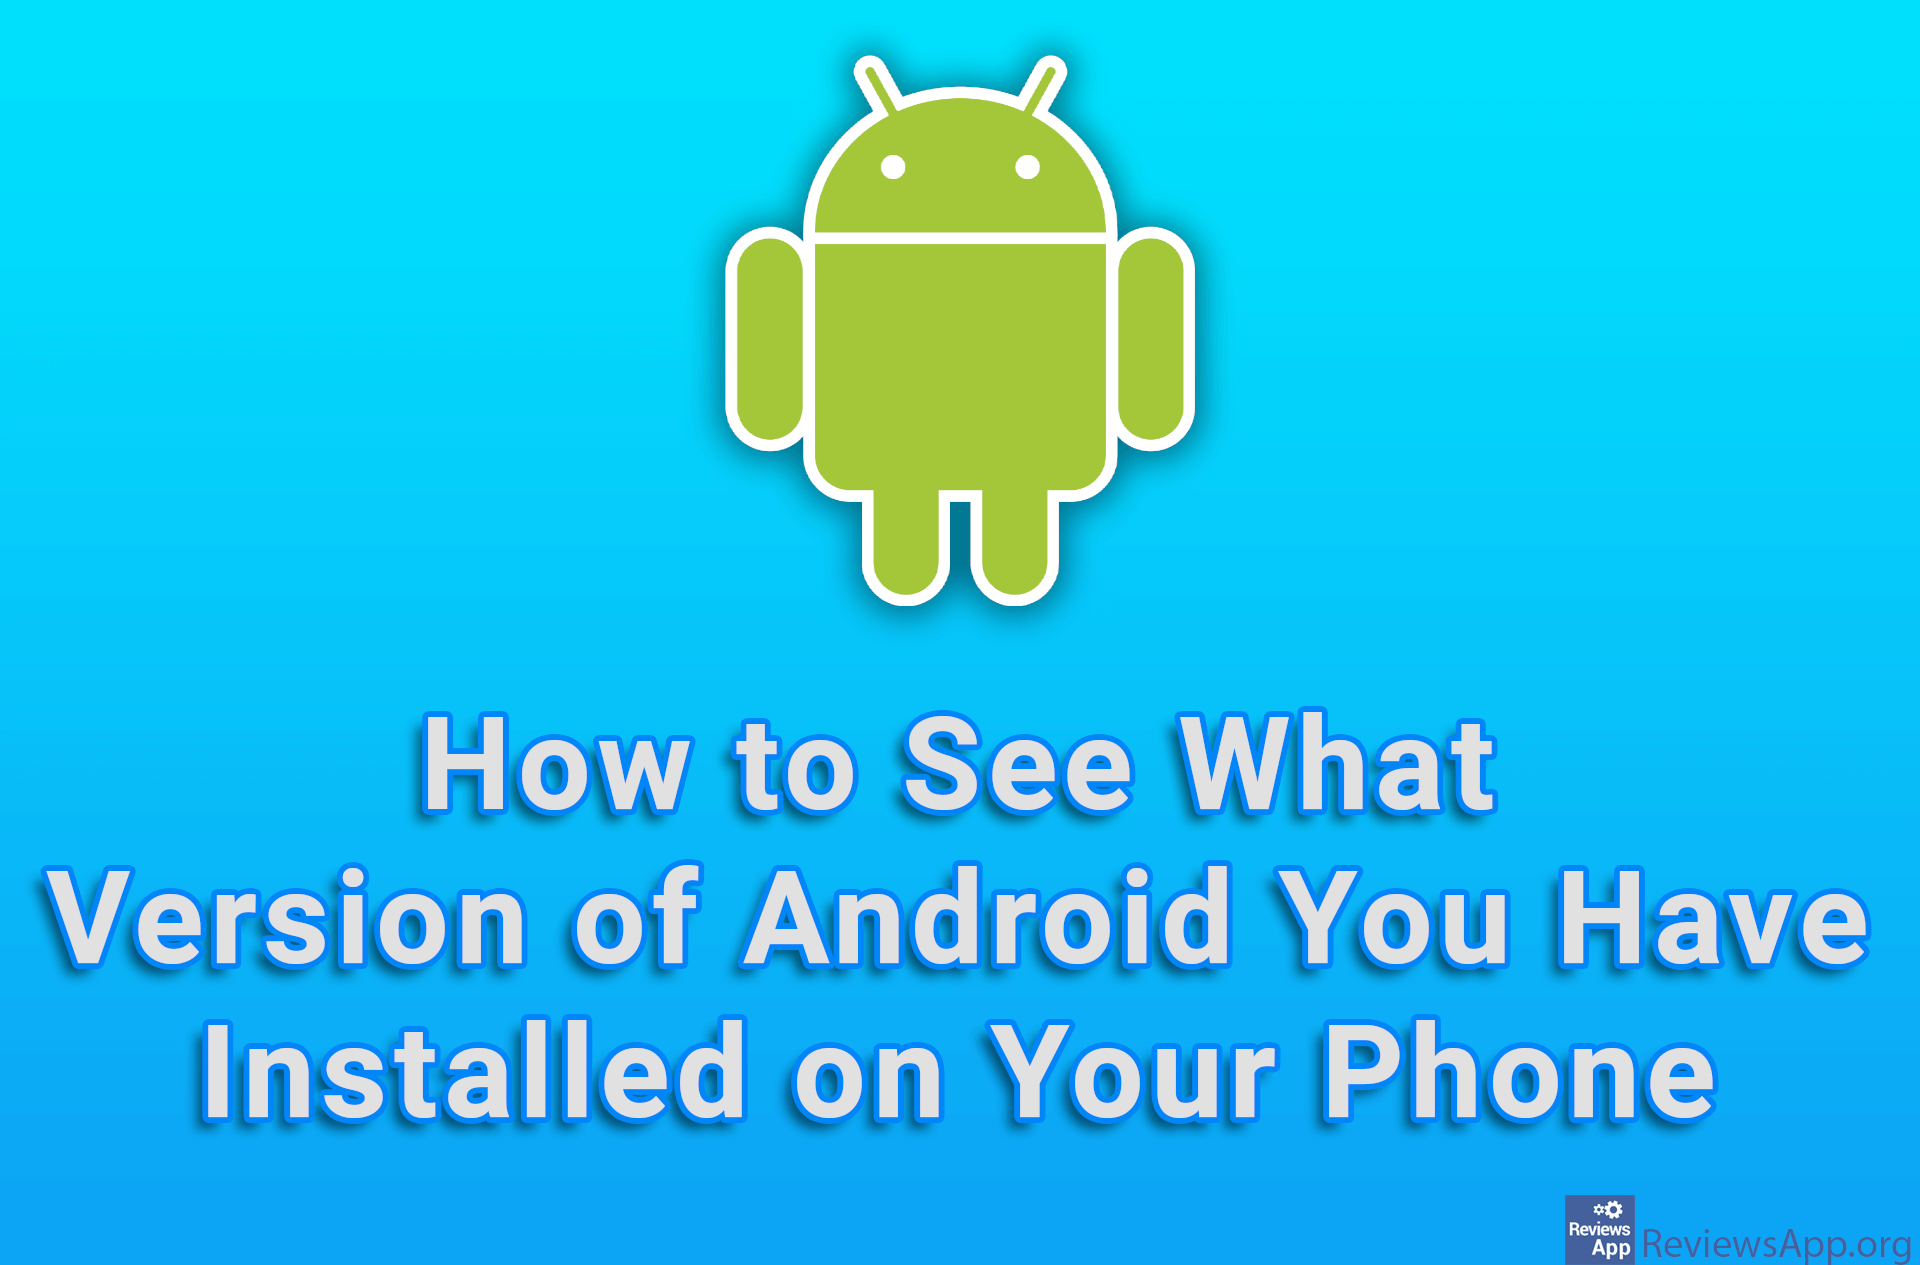 How to See What Version of Android You Have Installed on Your Phone